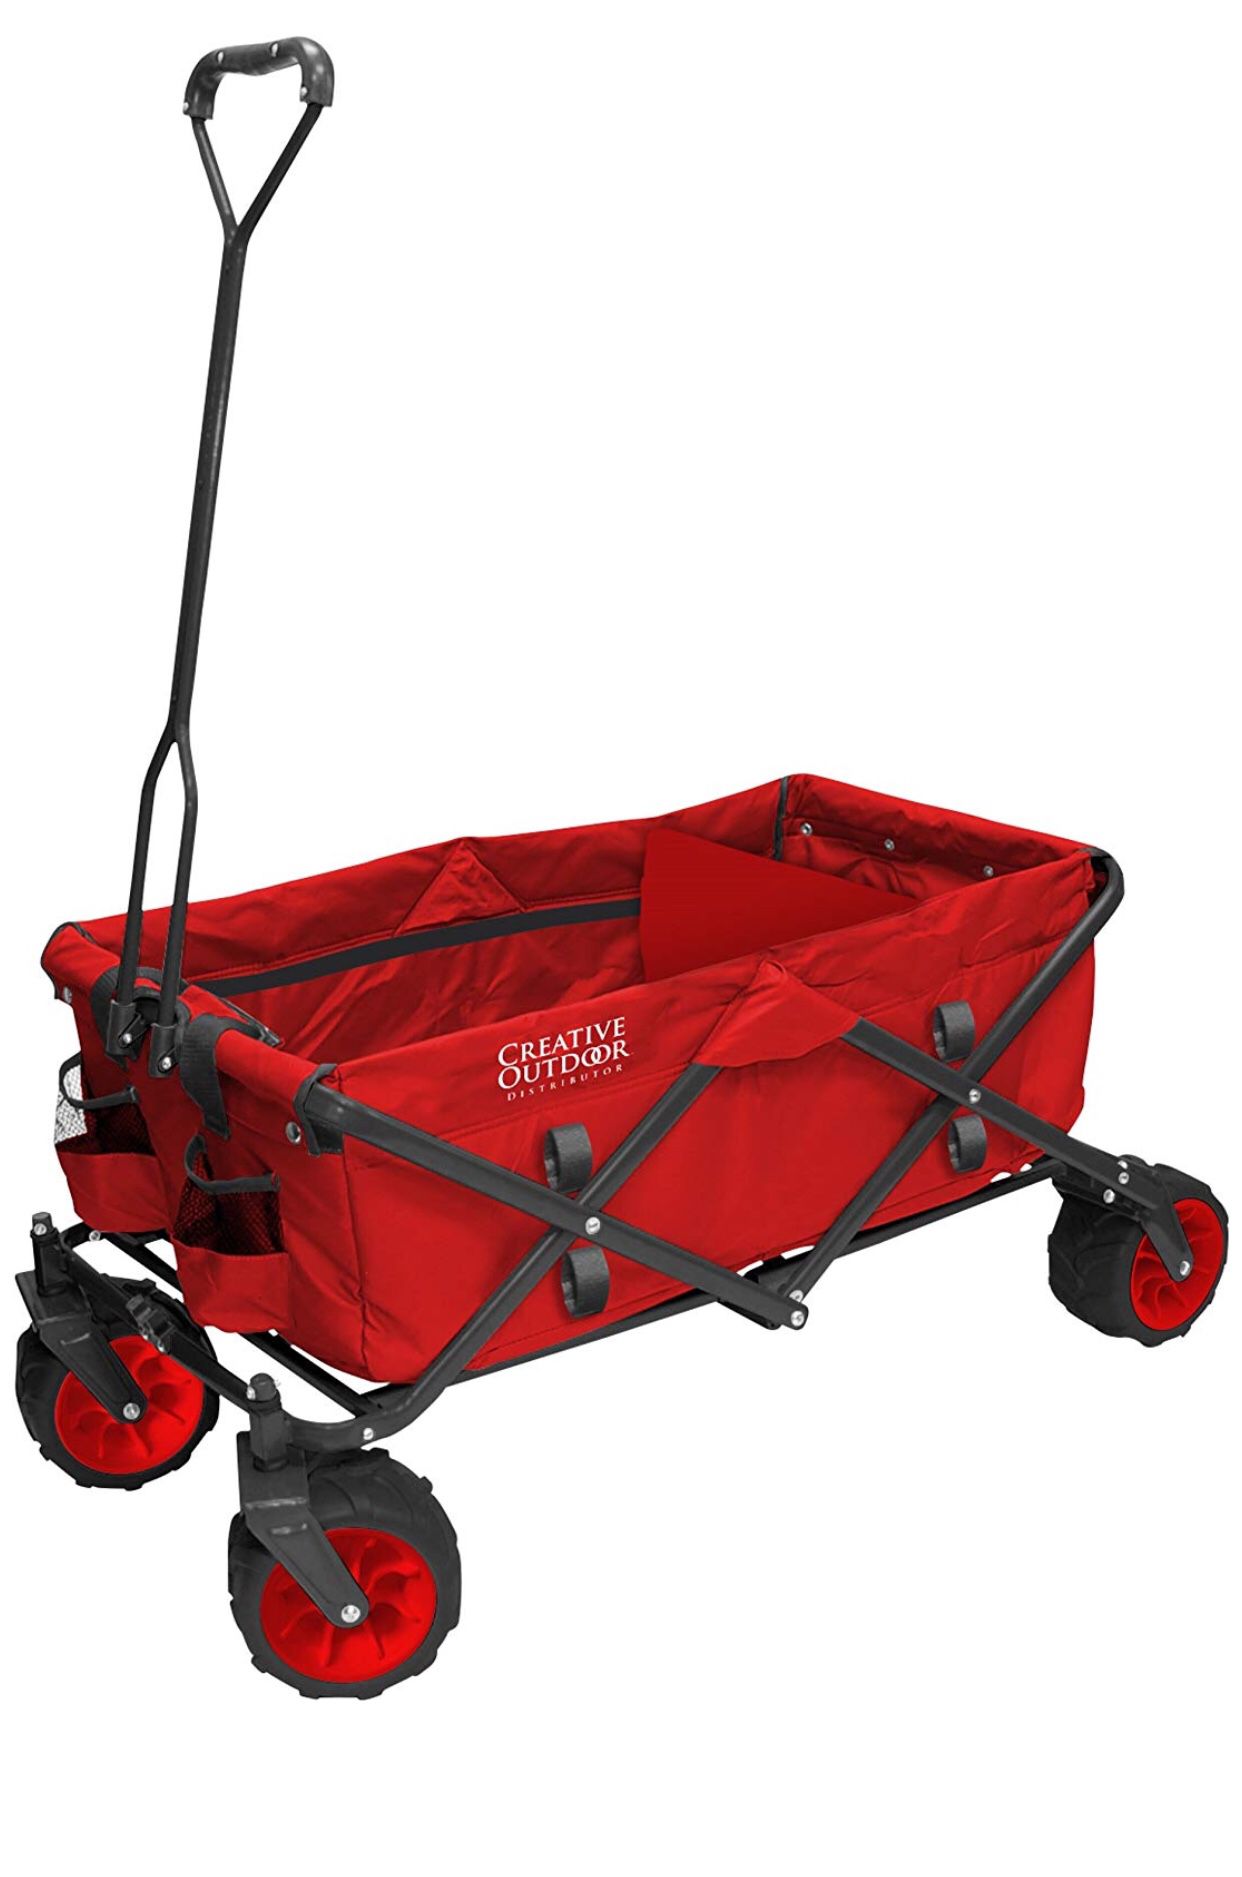 Creative Outdoors all-terrain foldable wagon. Red